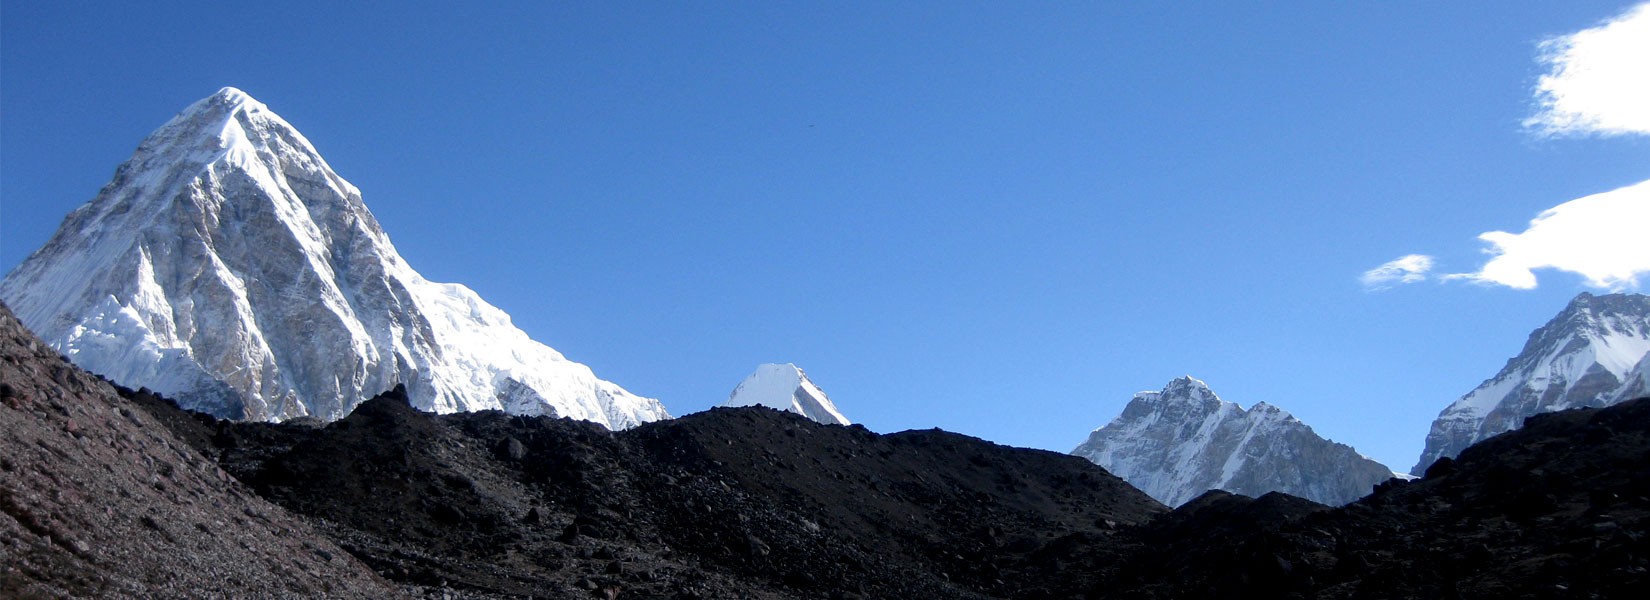 Pumori Expedition Package In Nepal